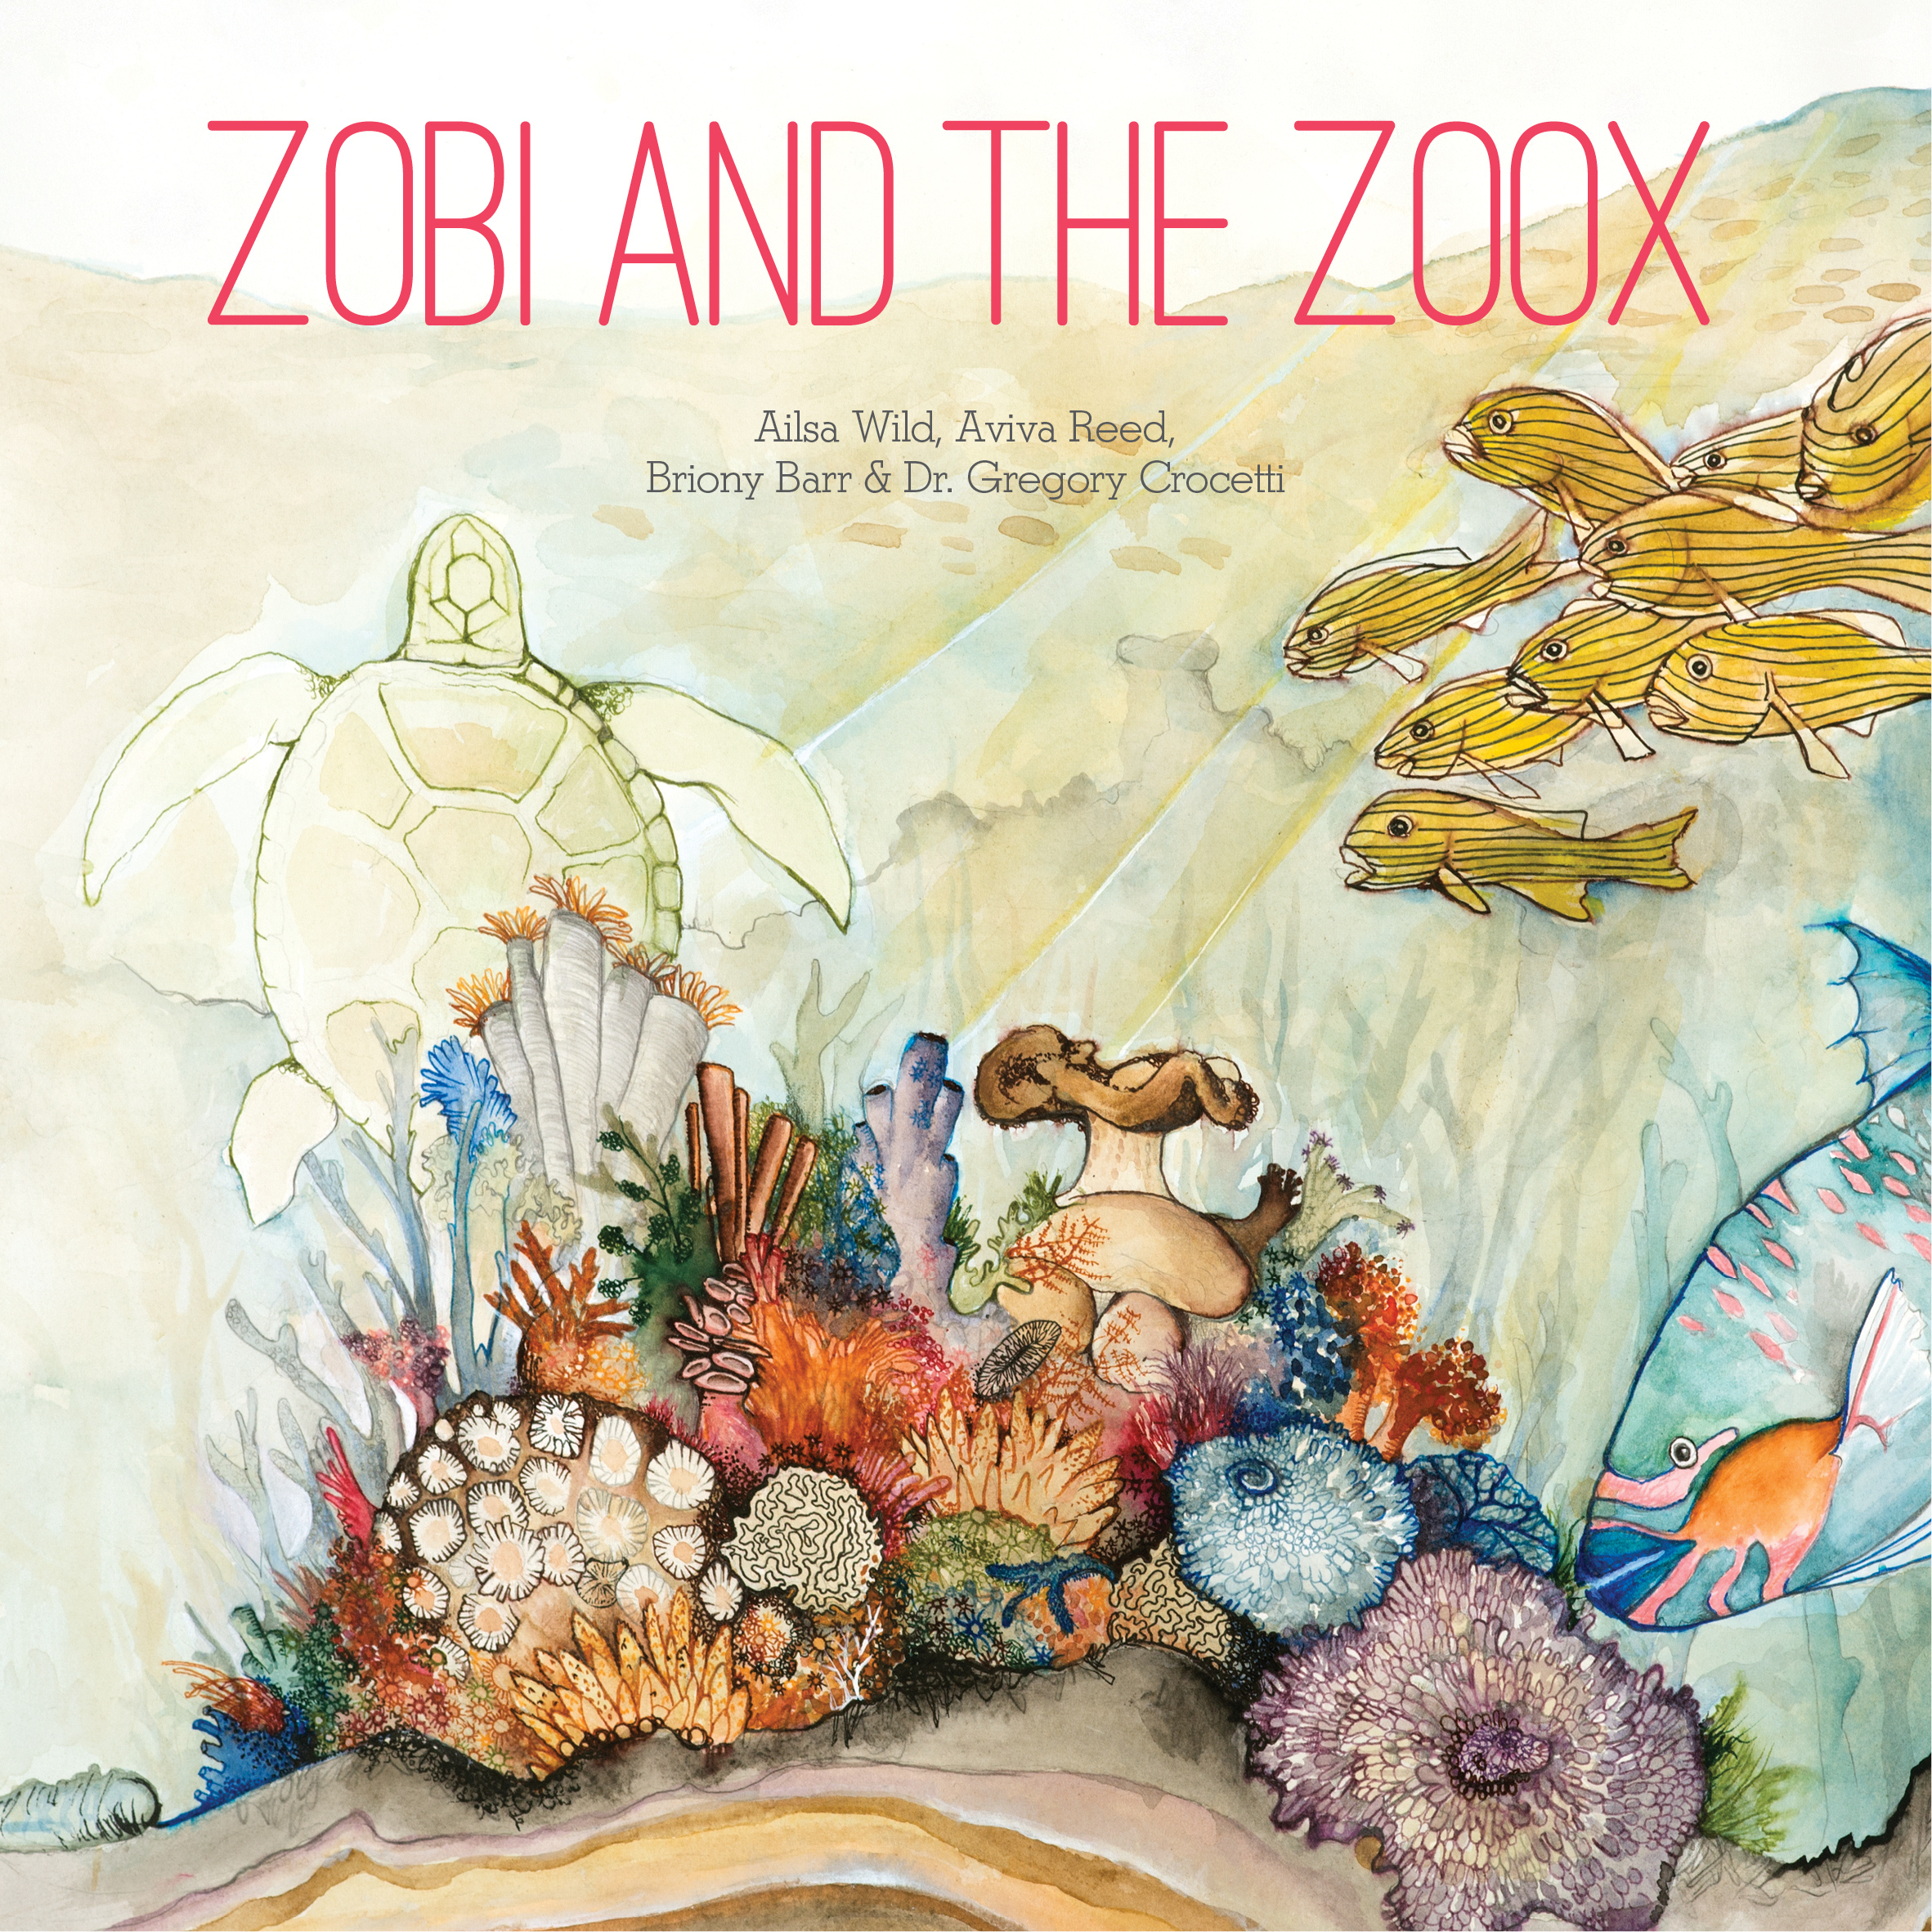 Zobi and the Zoox